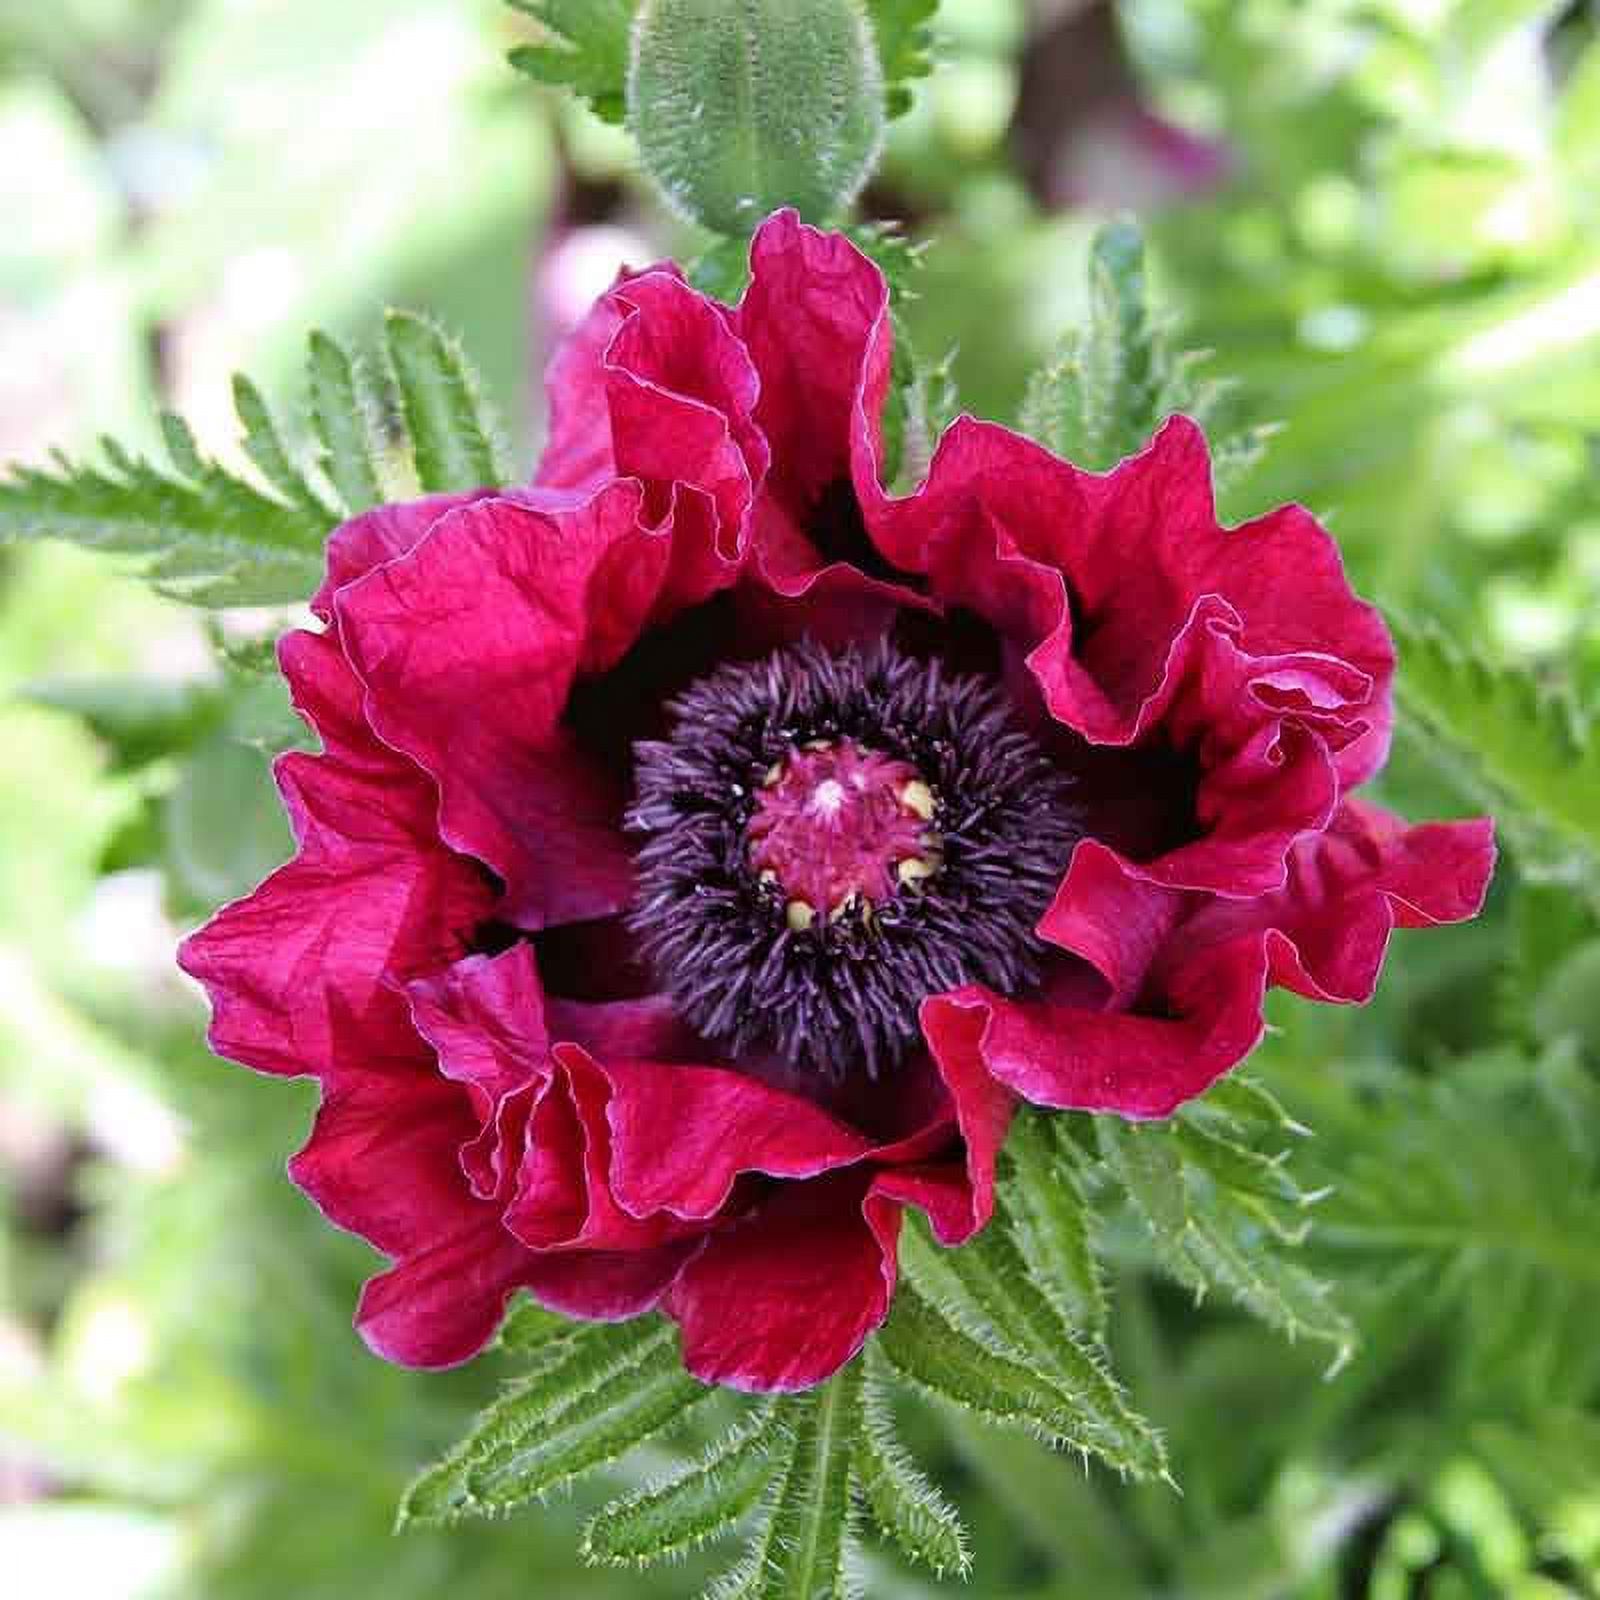 Papaver orientale Roots - Harlem - 10 Roots - Red Flower Bulbs,  Root  Attracts Butterflies, Attracts Pollinators, Easy to Grow & Maintain, Container Garden - image 1 of 4